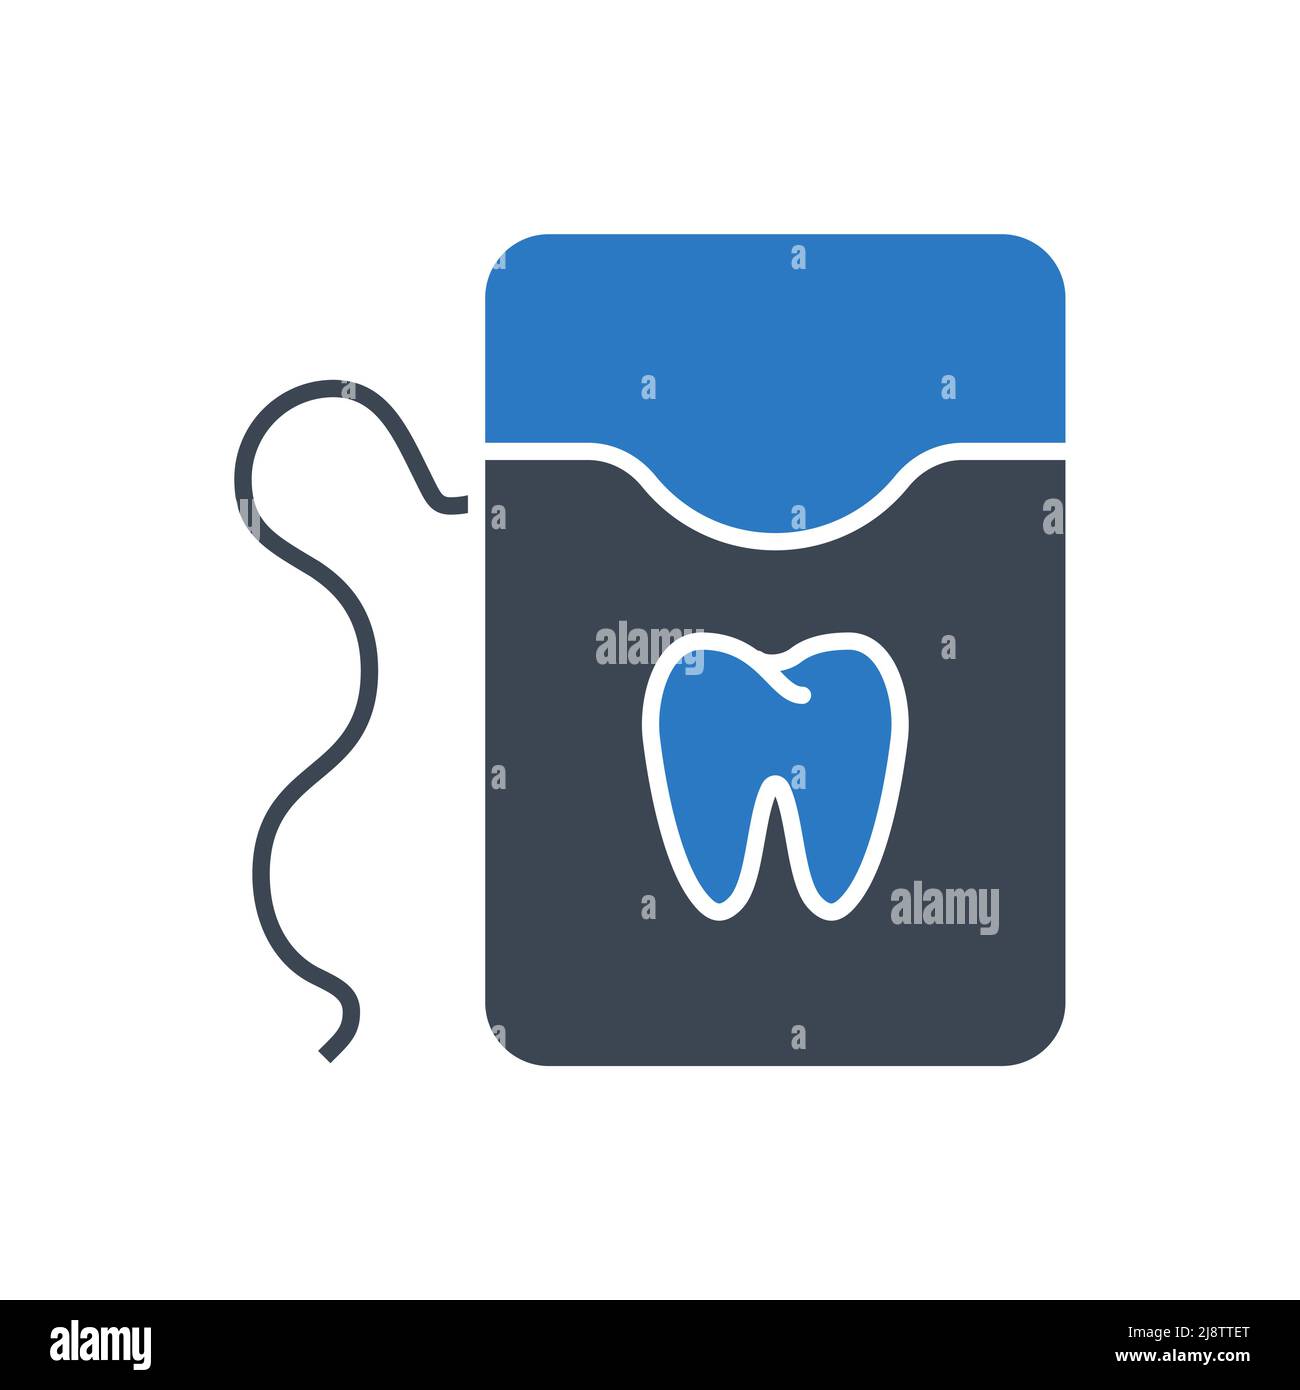 Dental Floss Related Vector Glyph Icon. Dental Floss Sign. Isolated on White Background Stock Vector